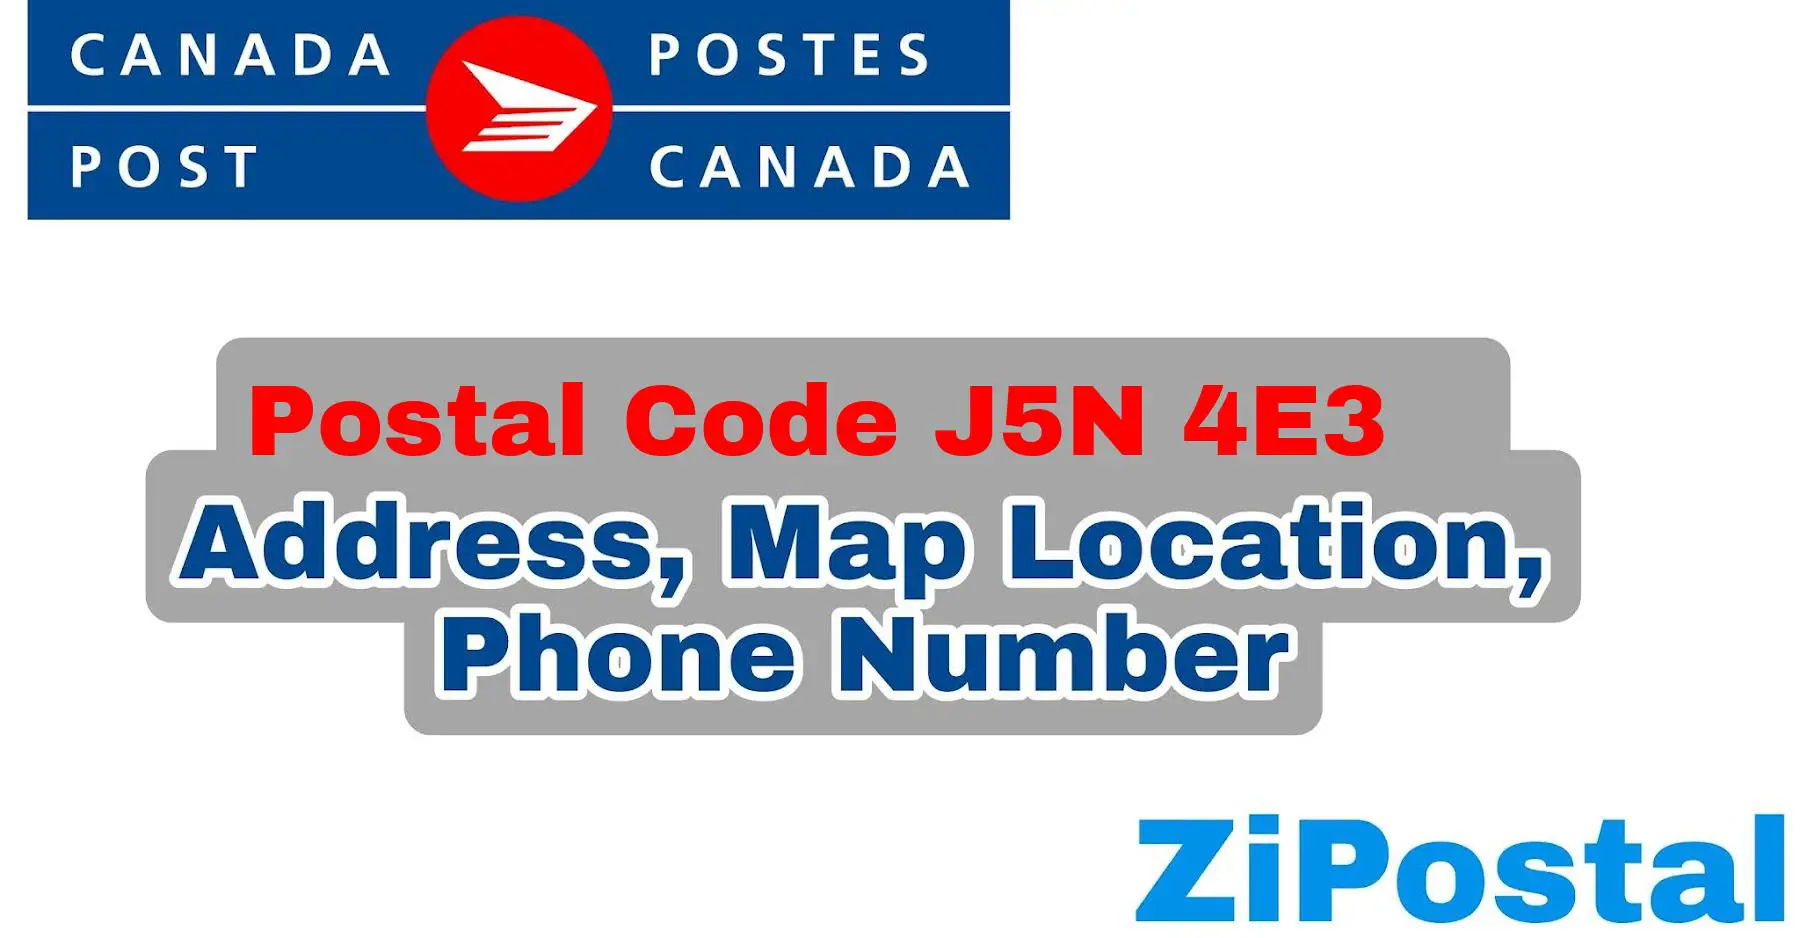 Postal Code J5N 4E3 Address Map Location and Phone Number